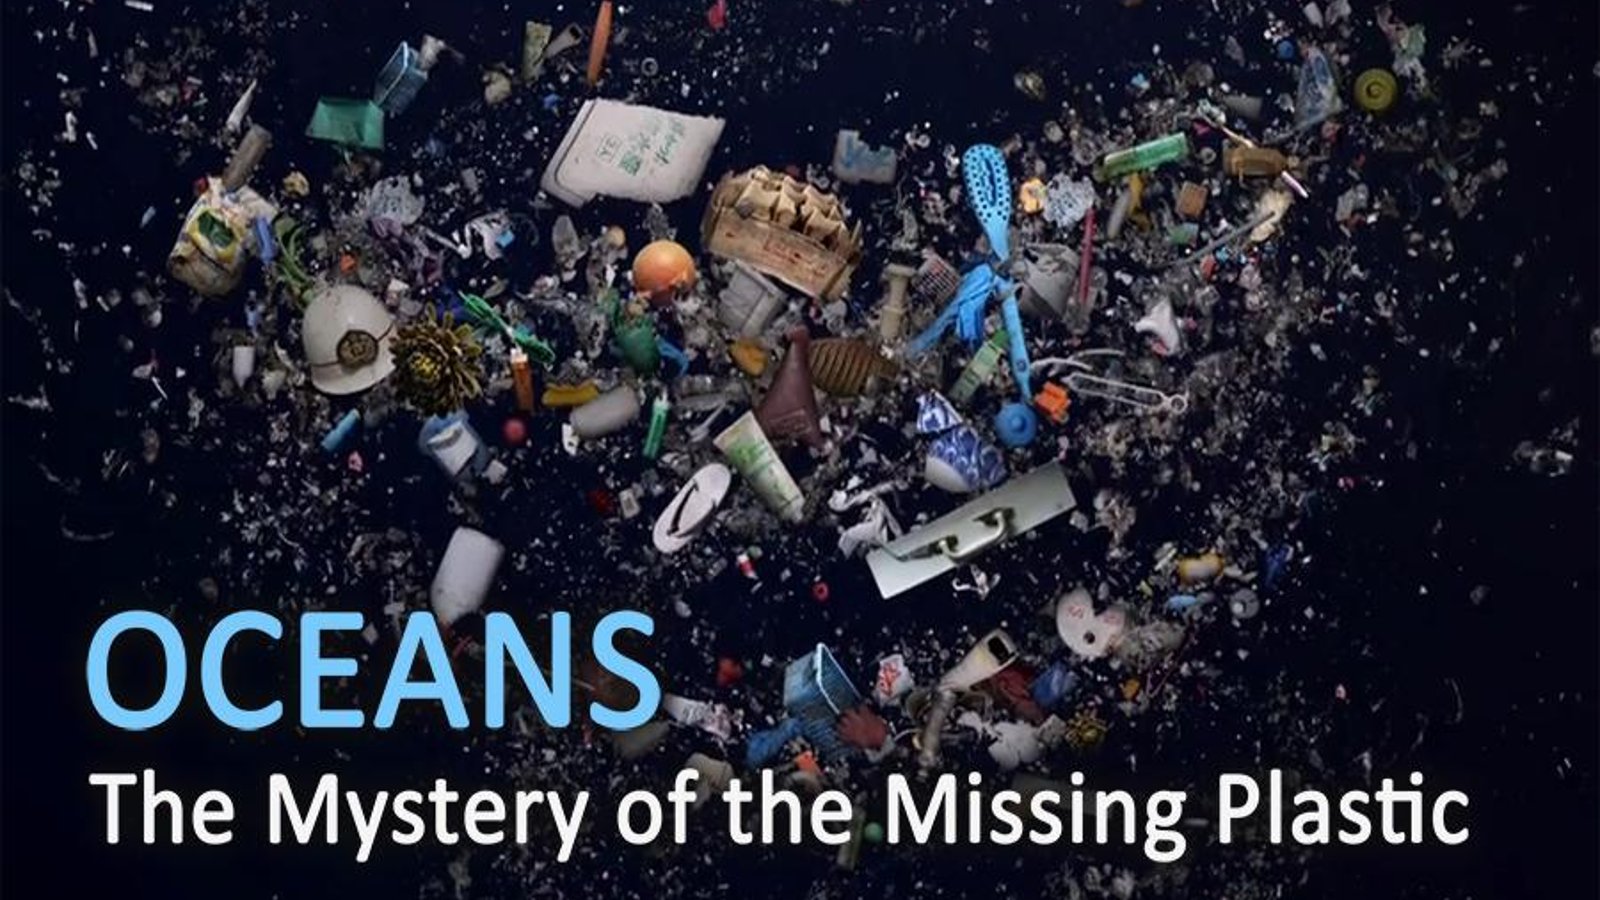 Oceans - The Mystery of the Missing Plastic